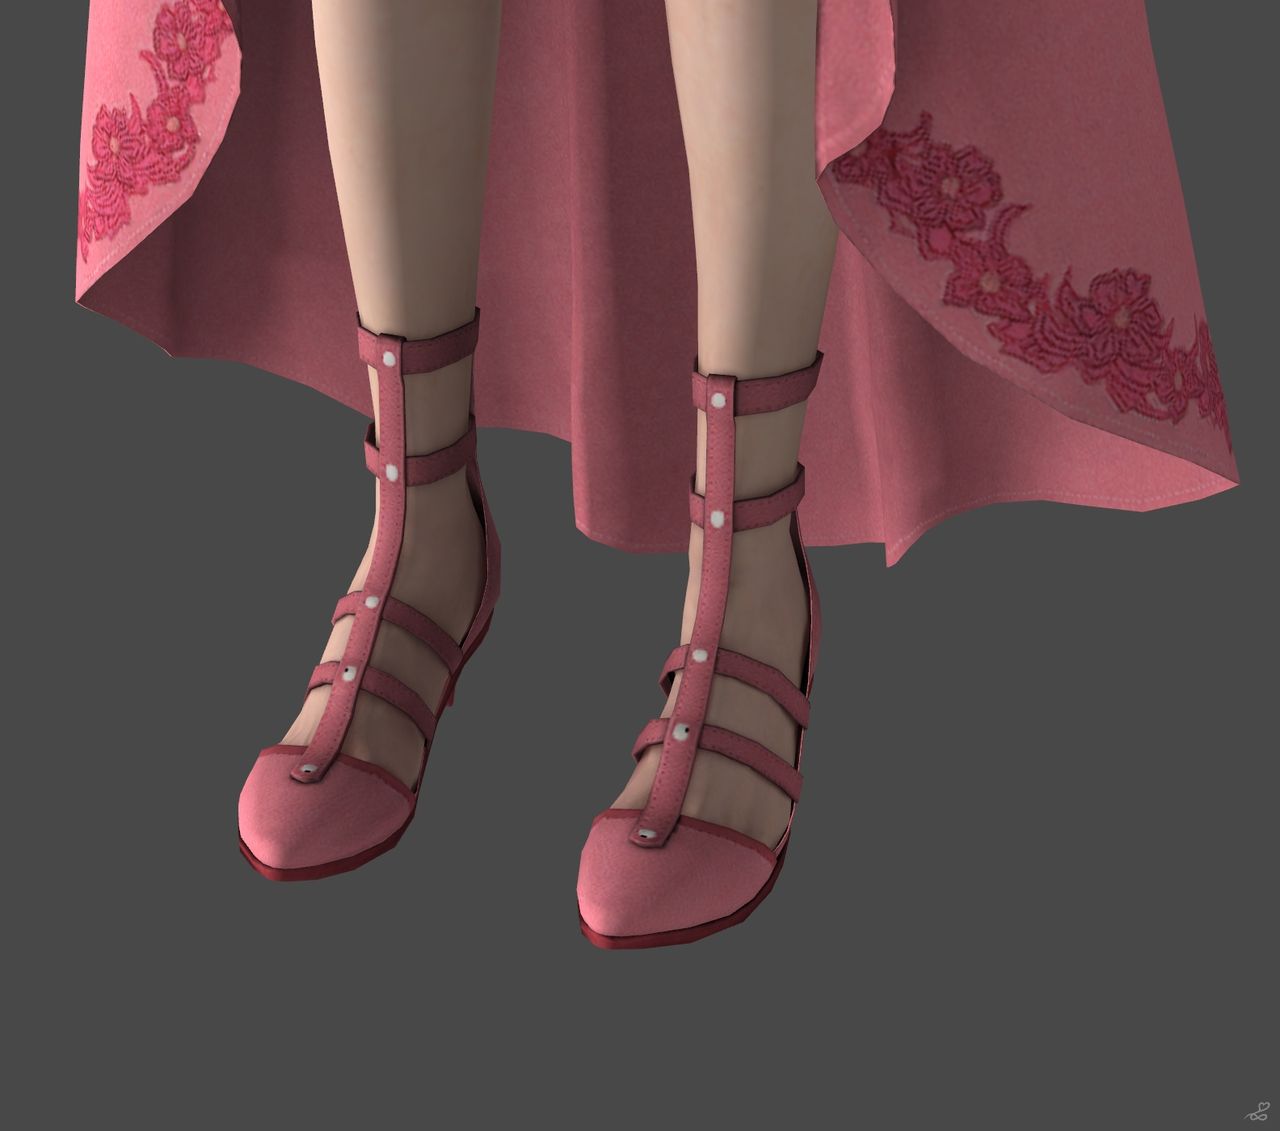 [J.A.] FF7 Remake | Aerith Reference 22